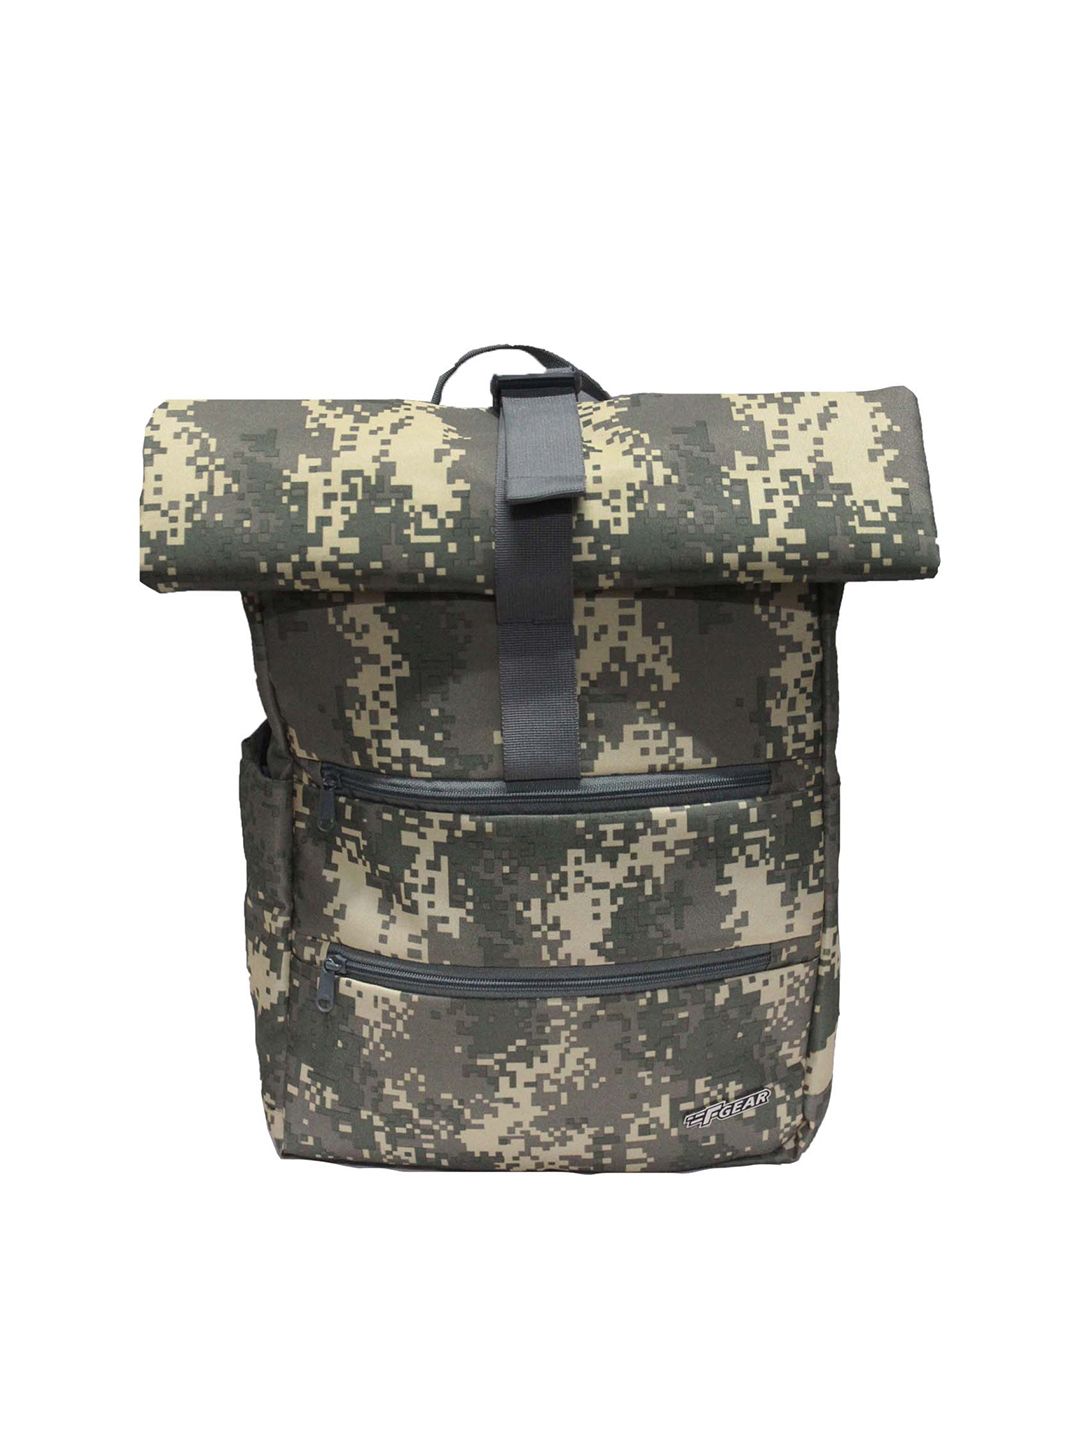 F Gear Unisex Grey & Olive Green Backpack Price in India